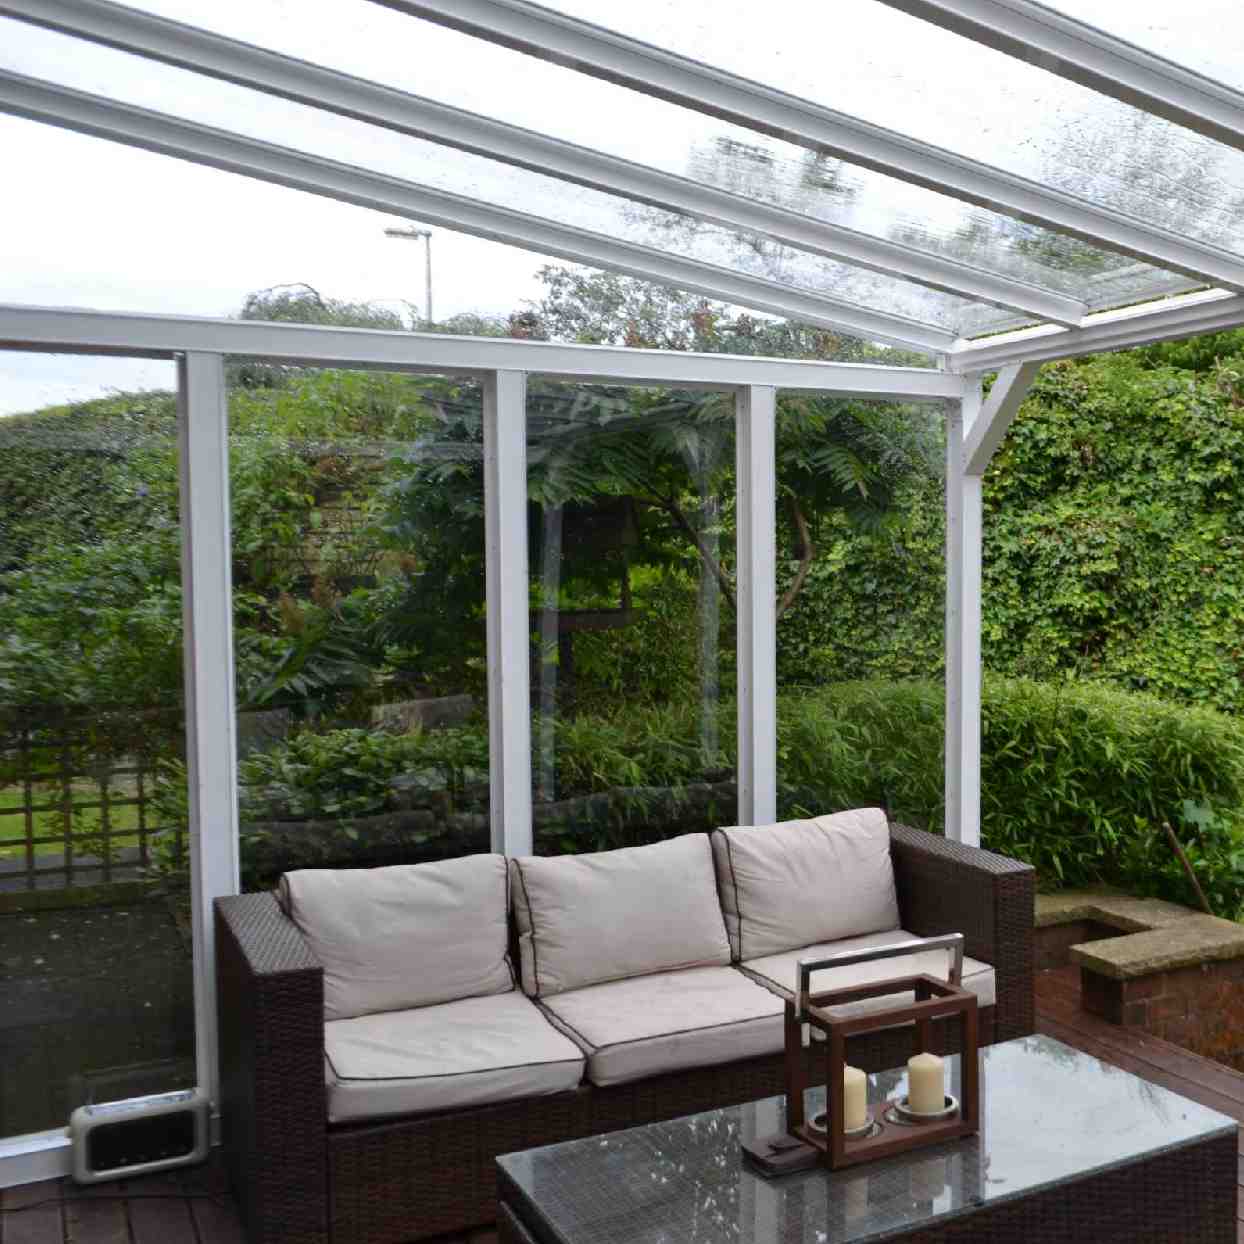 Buy Omega Verandah White with 16mm Polycarbonate Glazing - 3.1m (W) x 4.5m (P), (2) Supporting Posts online today